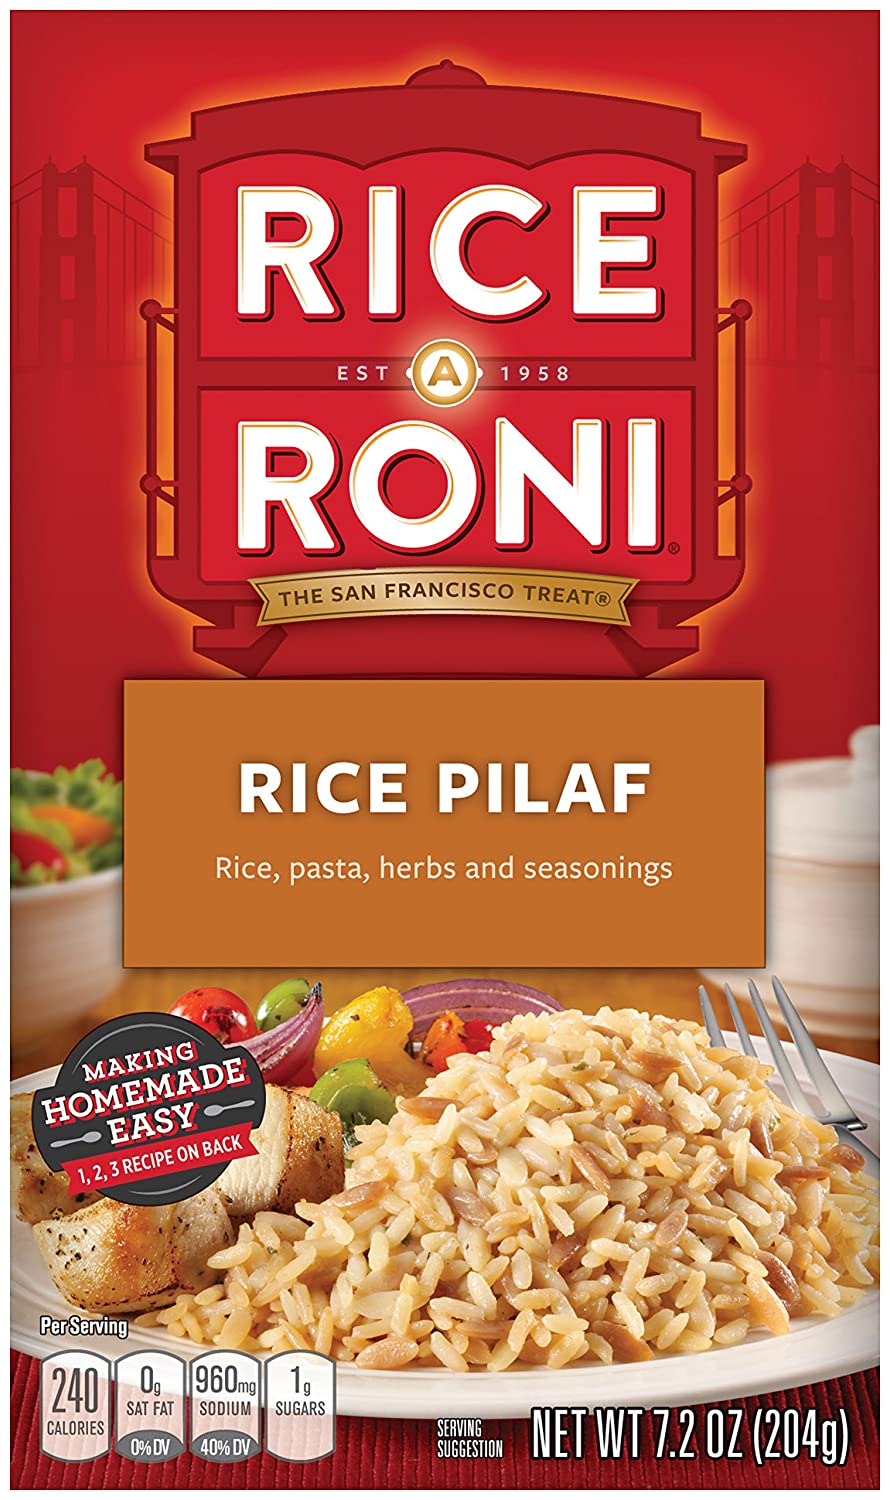 12-Count 7.2oz Rice a Roni Pasta and Rice Mix (Rice Pilaf) $8.63 + Free Prime Shipping